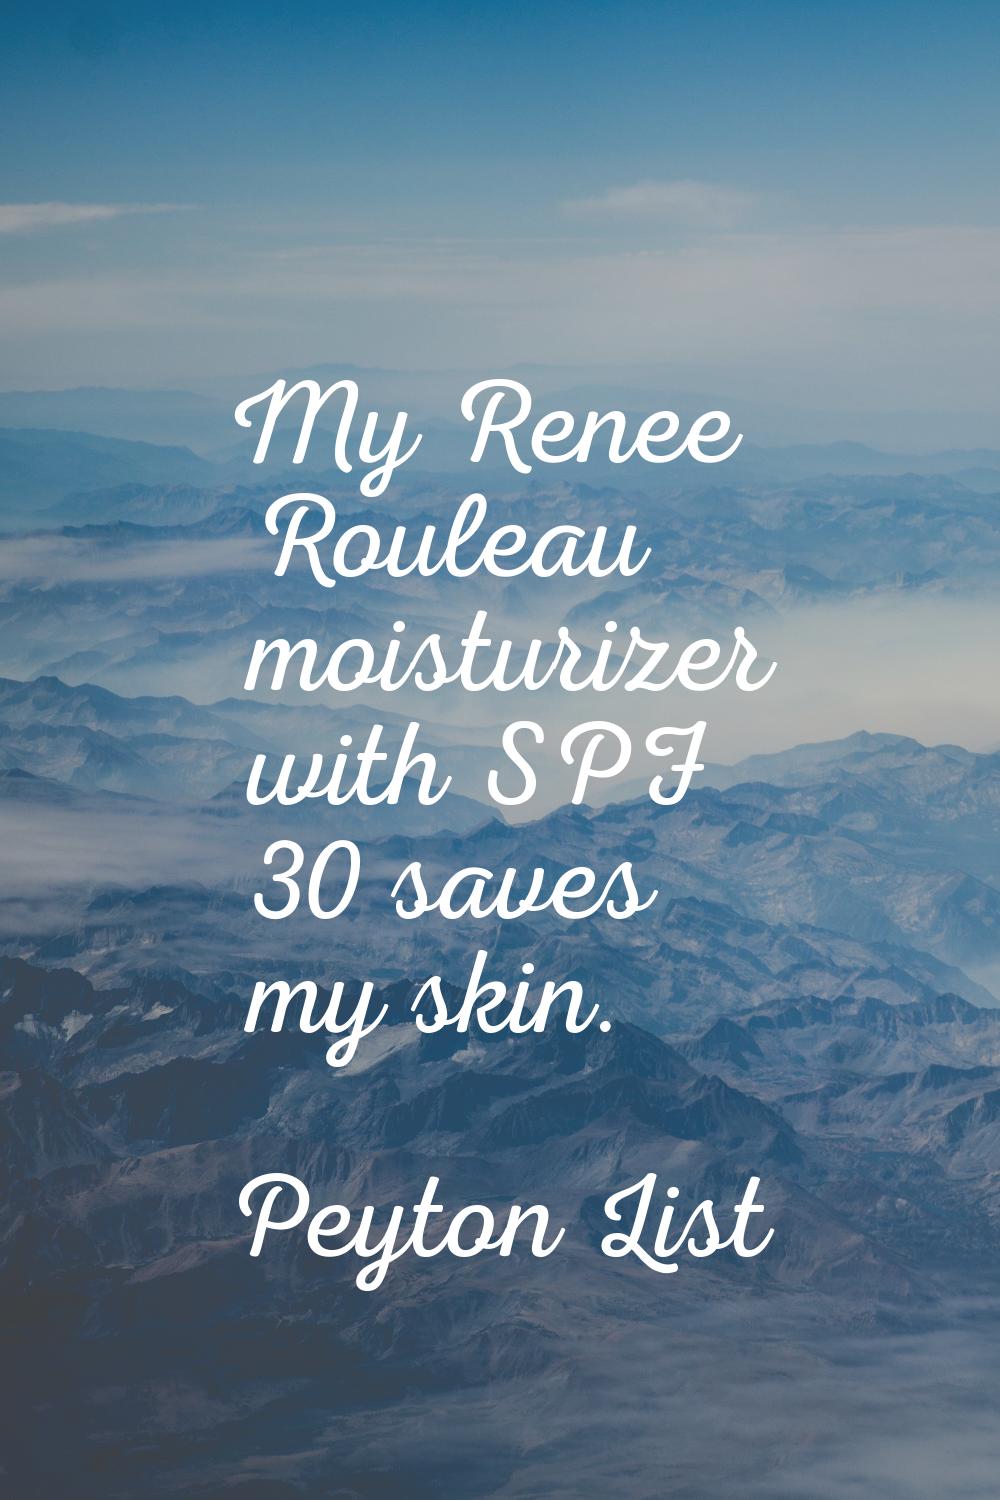 My Renee Rouleau moisturizer with SPF 30 saves my skin.